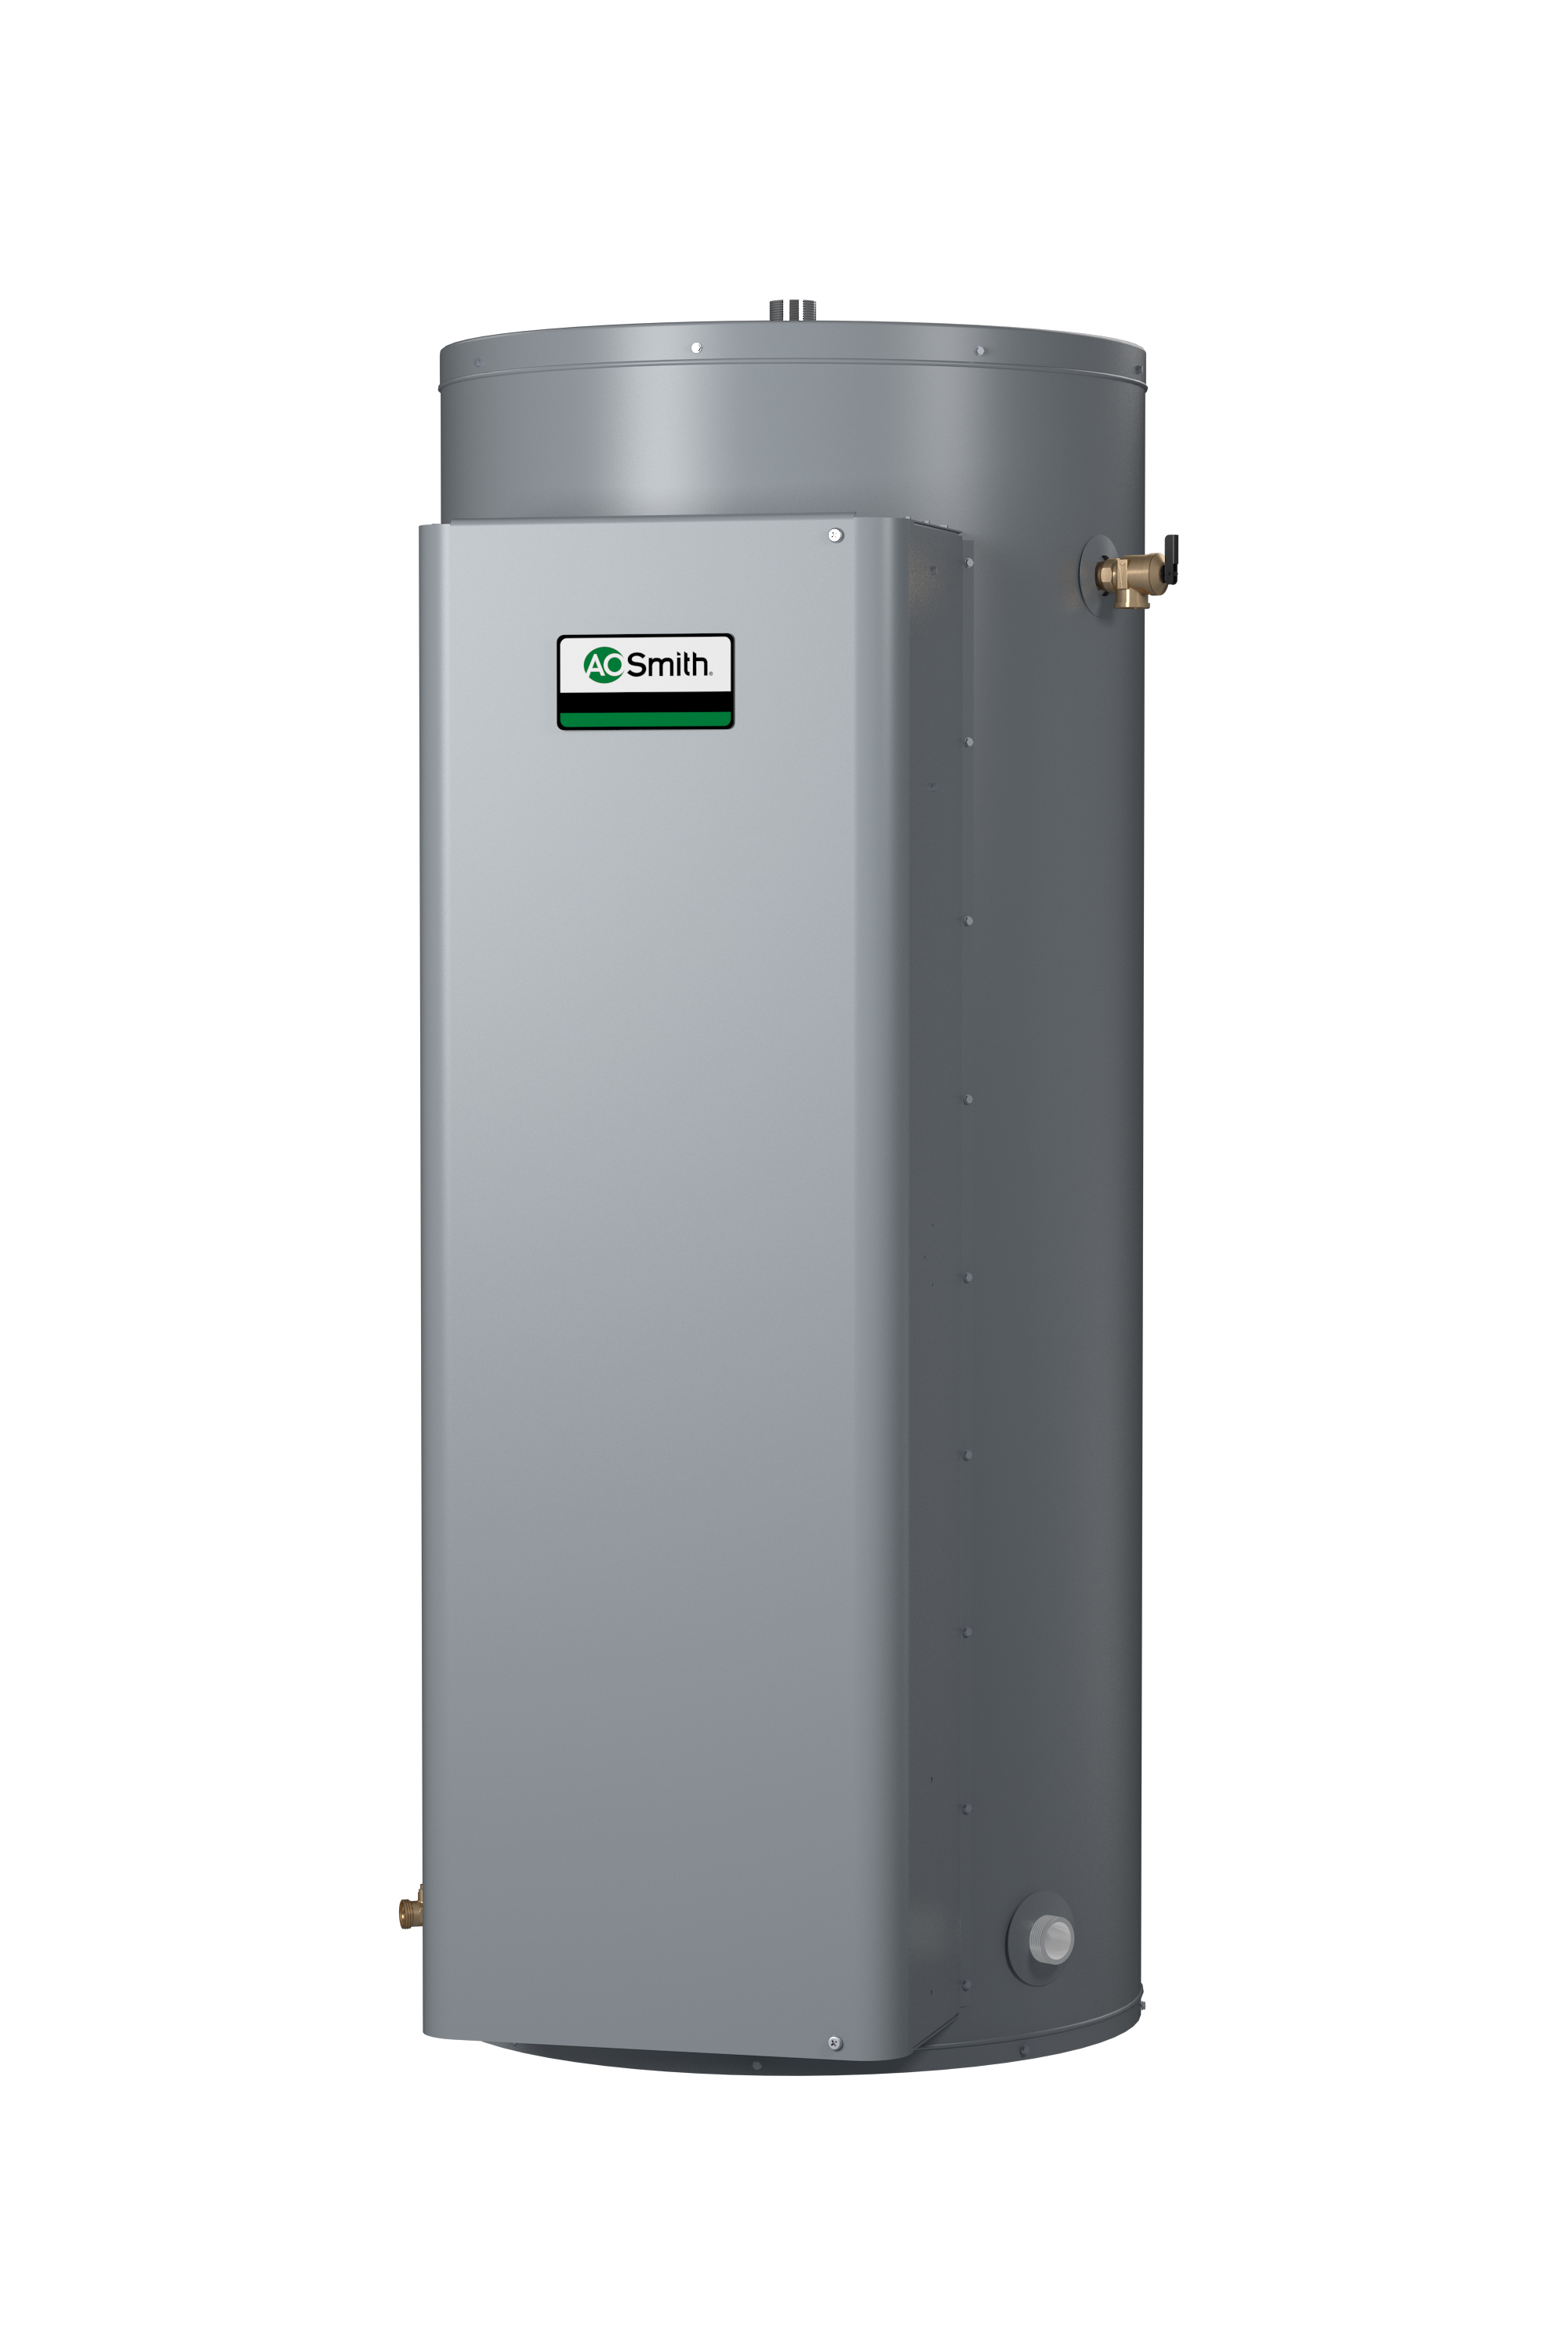 AO SMITH DVE-120-40.5, 119 GALLONS, 40.5KW, 277 VOLT, 146.2 AMPS, 1 PHASE, 9 ELEMENT, GOLD Xi SERIES HEAVY DUTY COMMERCIAL ELECTRIC WATER HEATER